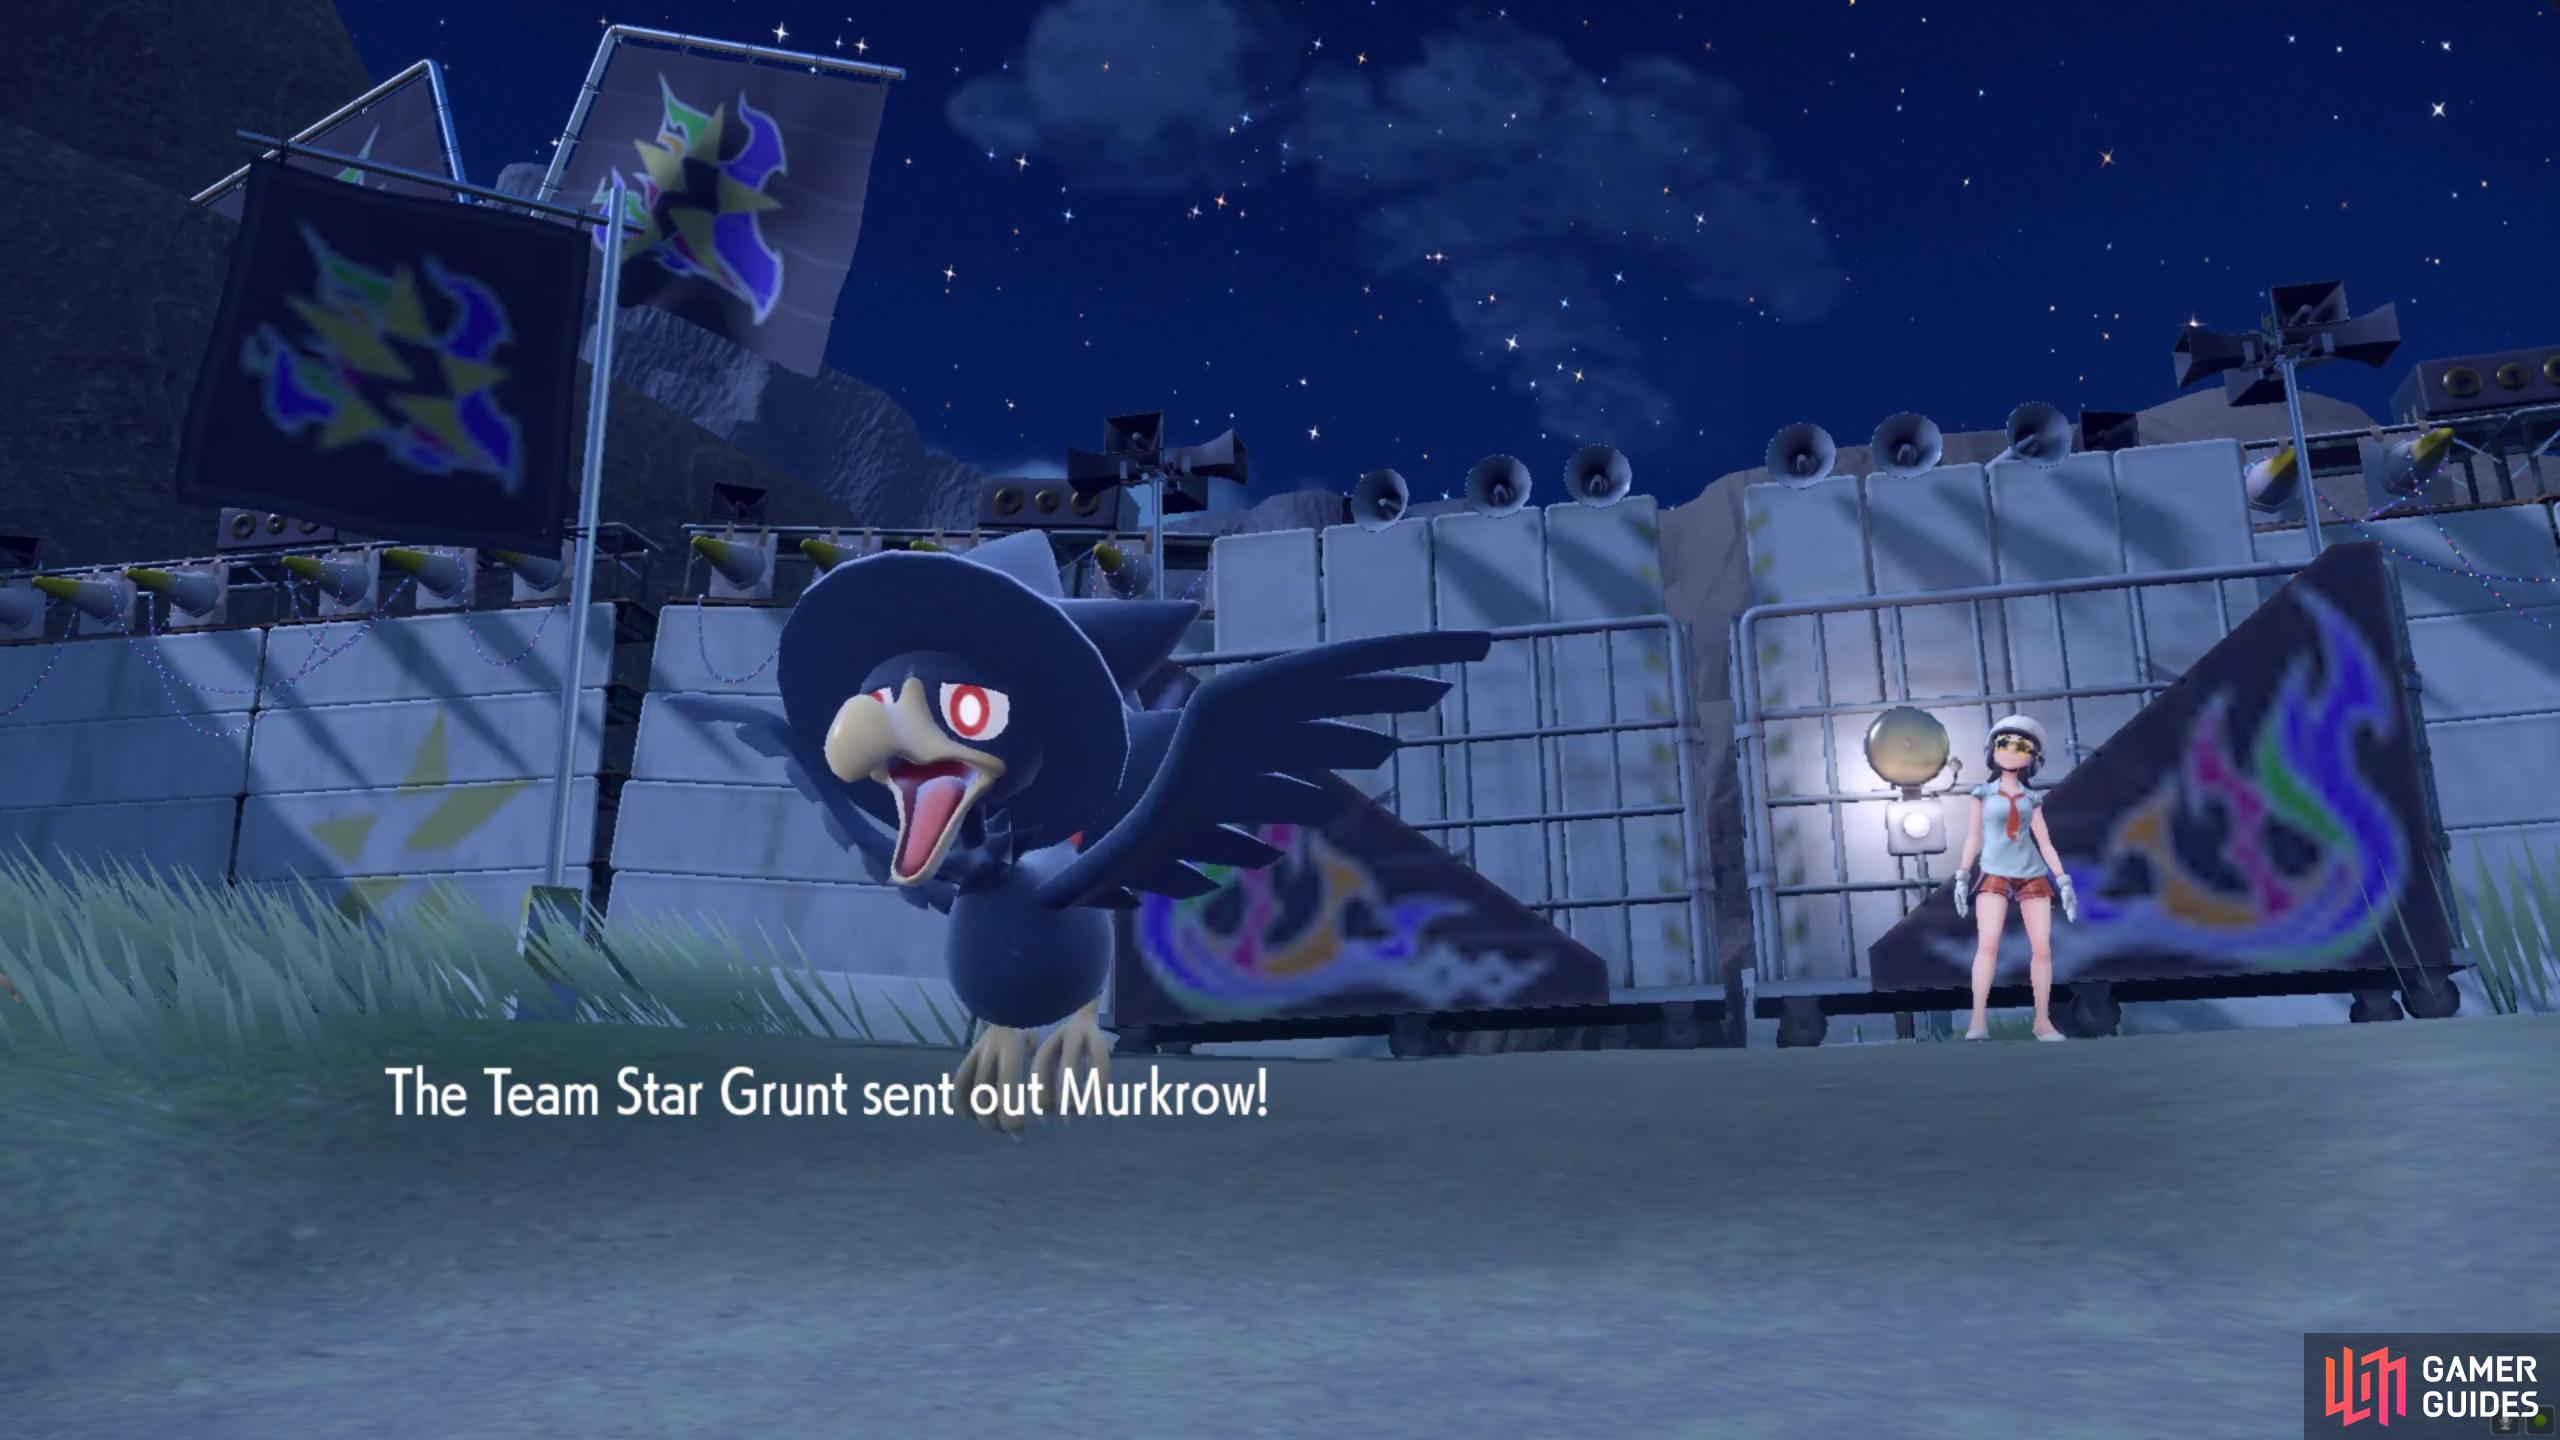 Bug and Fighting attacks deal neutral damage versus Murkrow.